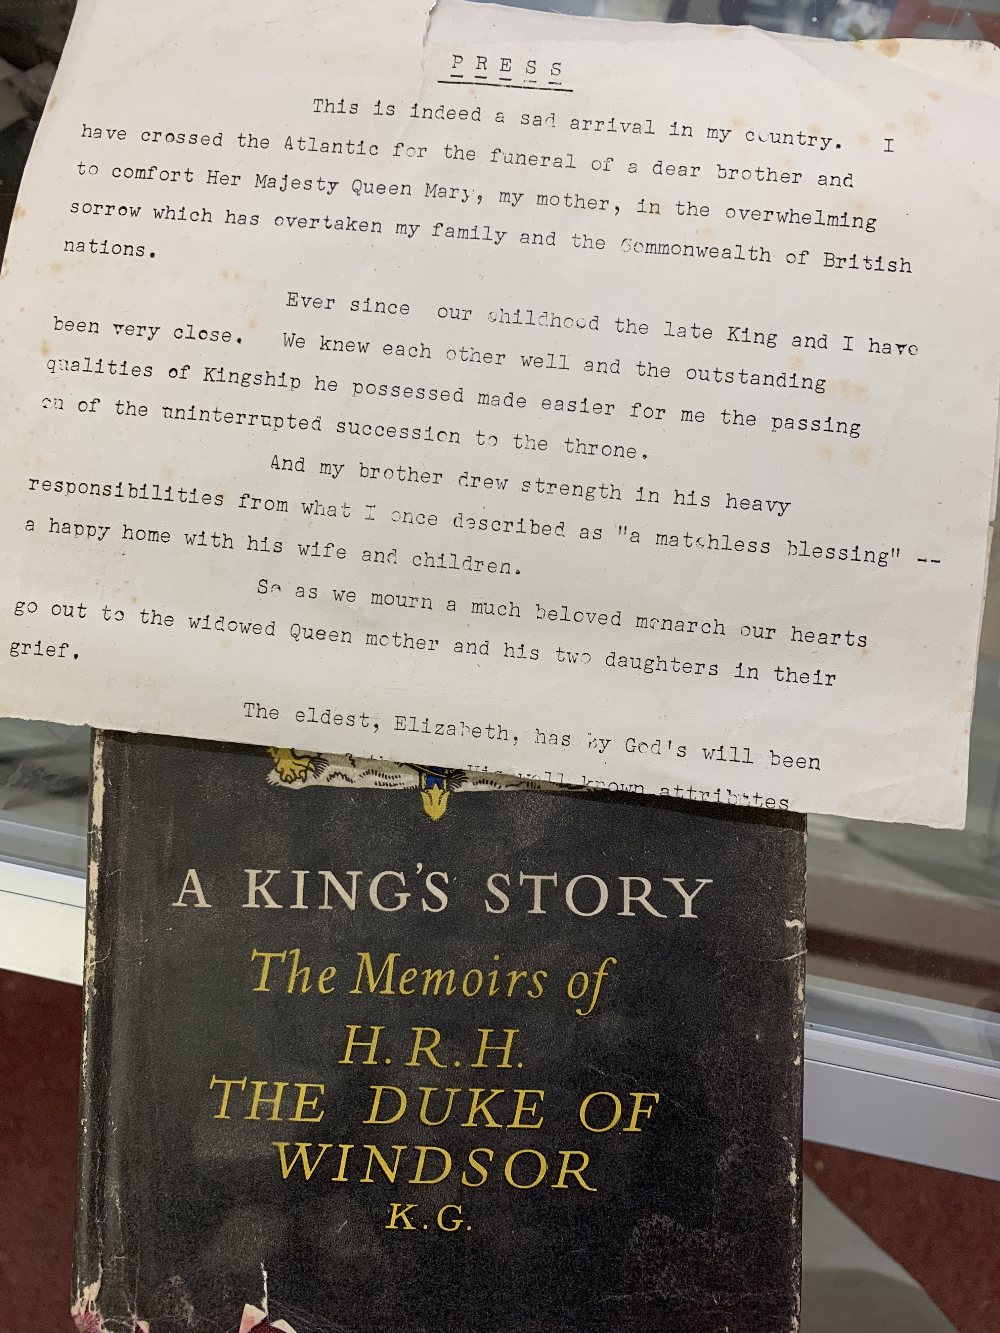 Monarchy: Press release written onboard Queen Mary in 1952 by Edward Duke of Windsor relating to the